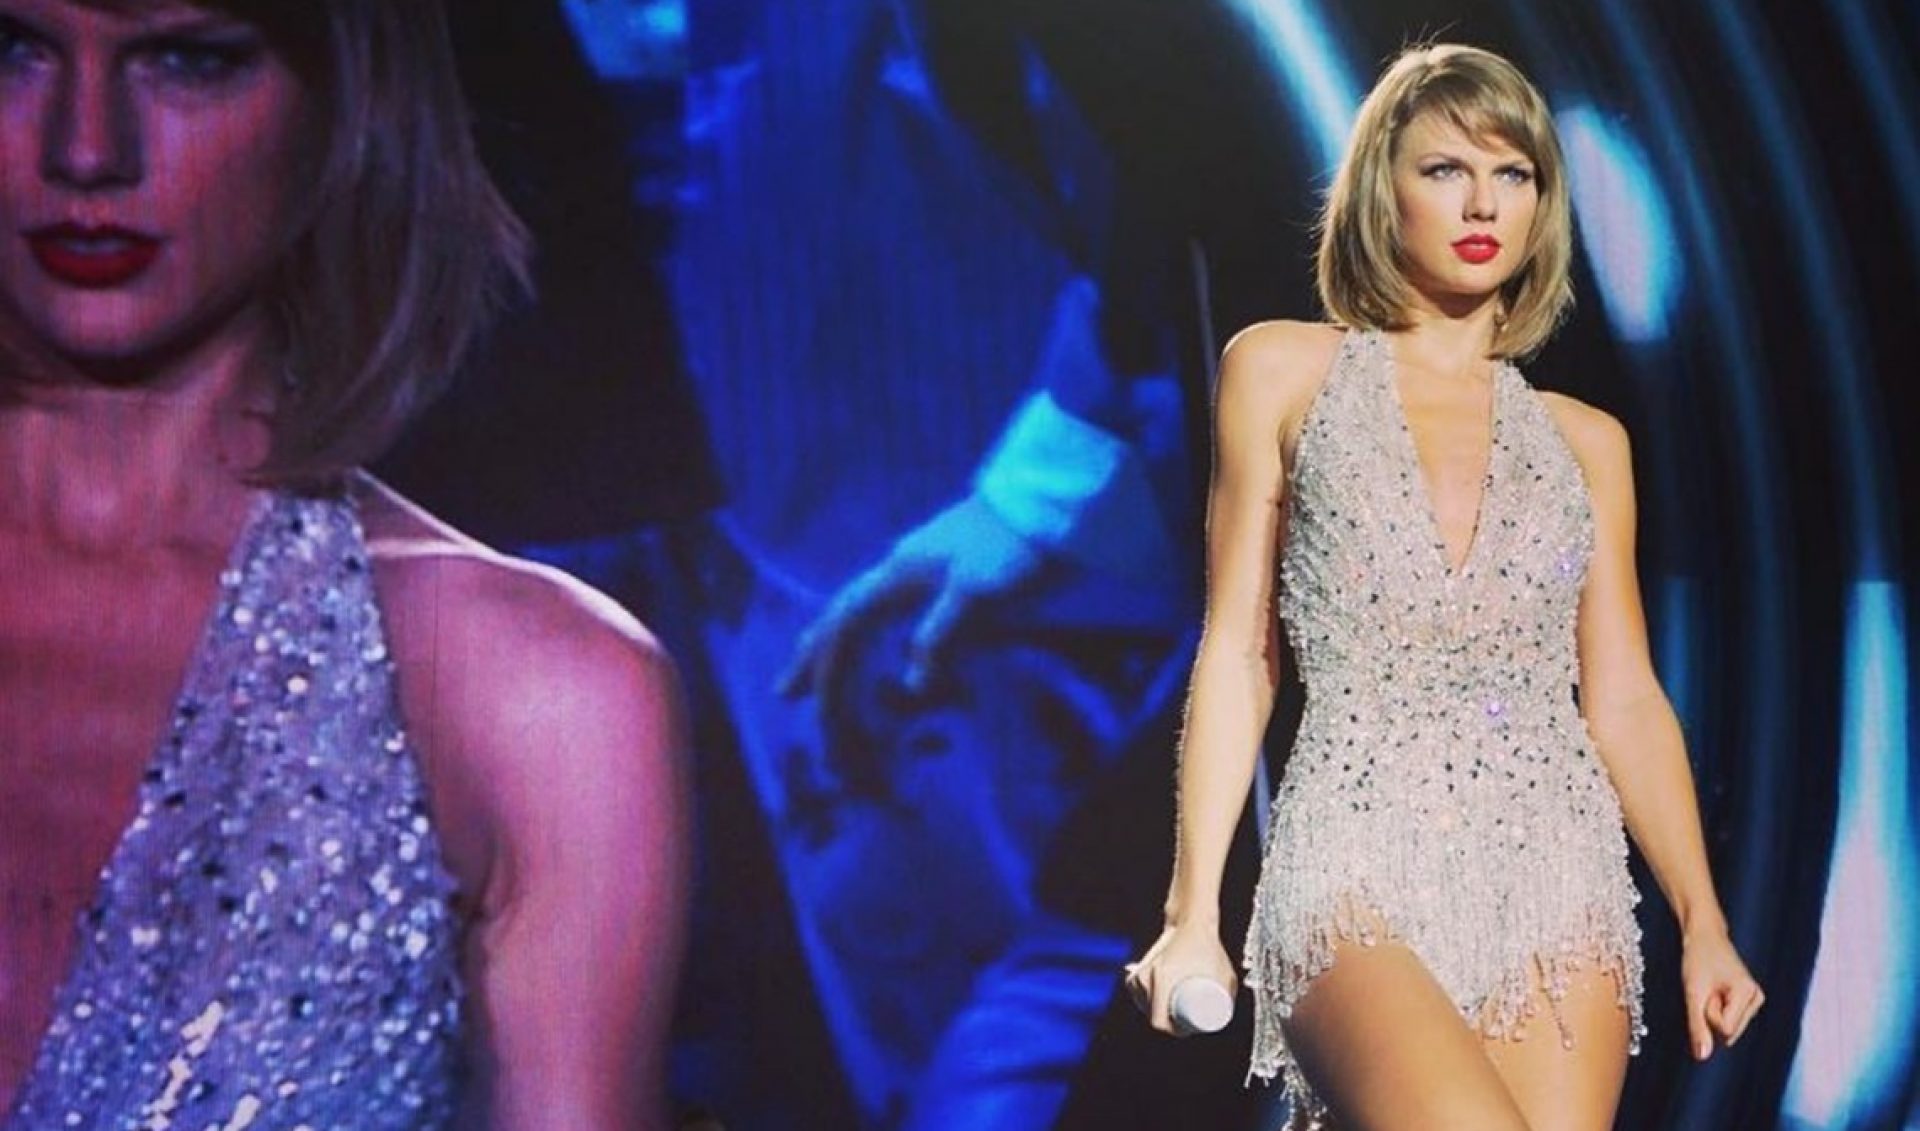 Demanding Changes To DMCA, Taylor Swift And U2 Join Music Industry’s Battle Against YouTube